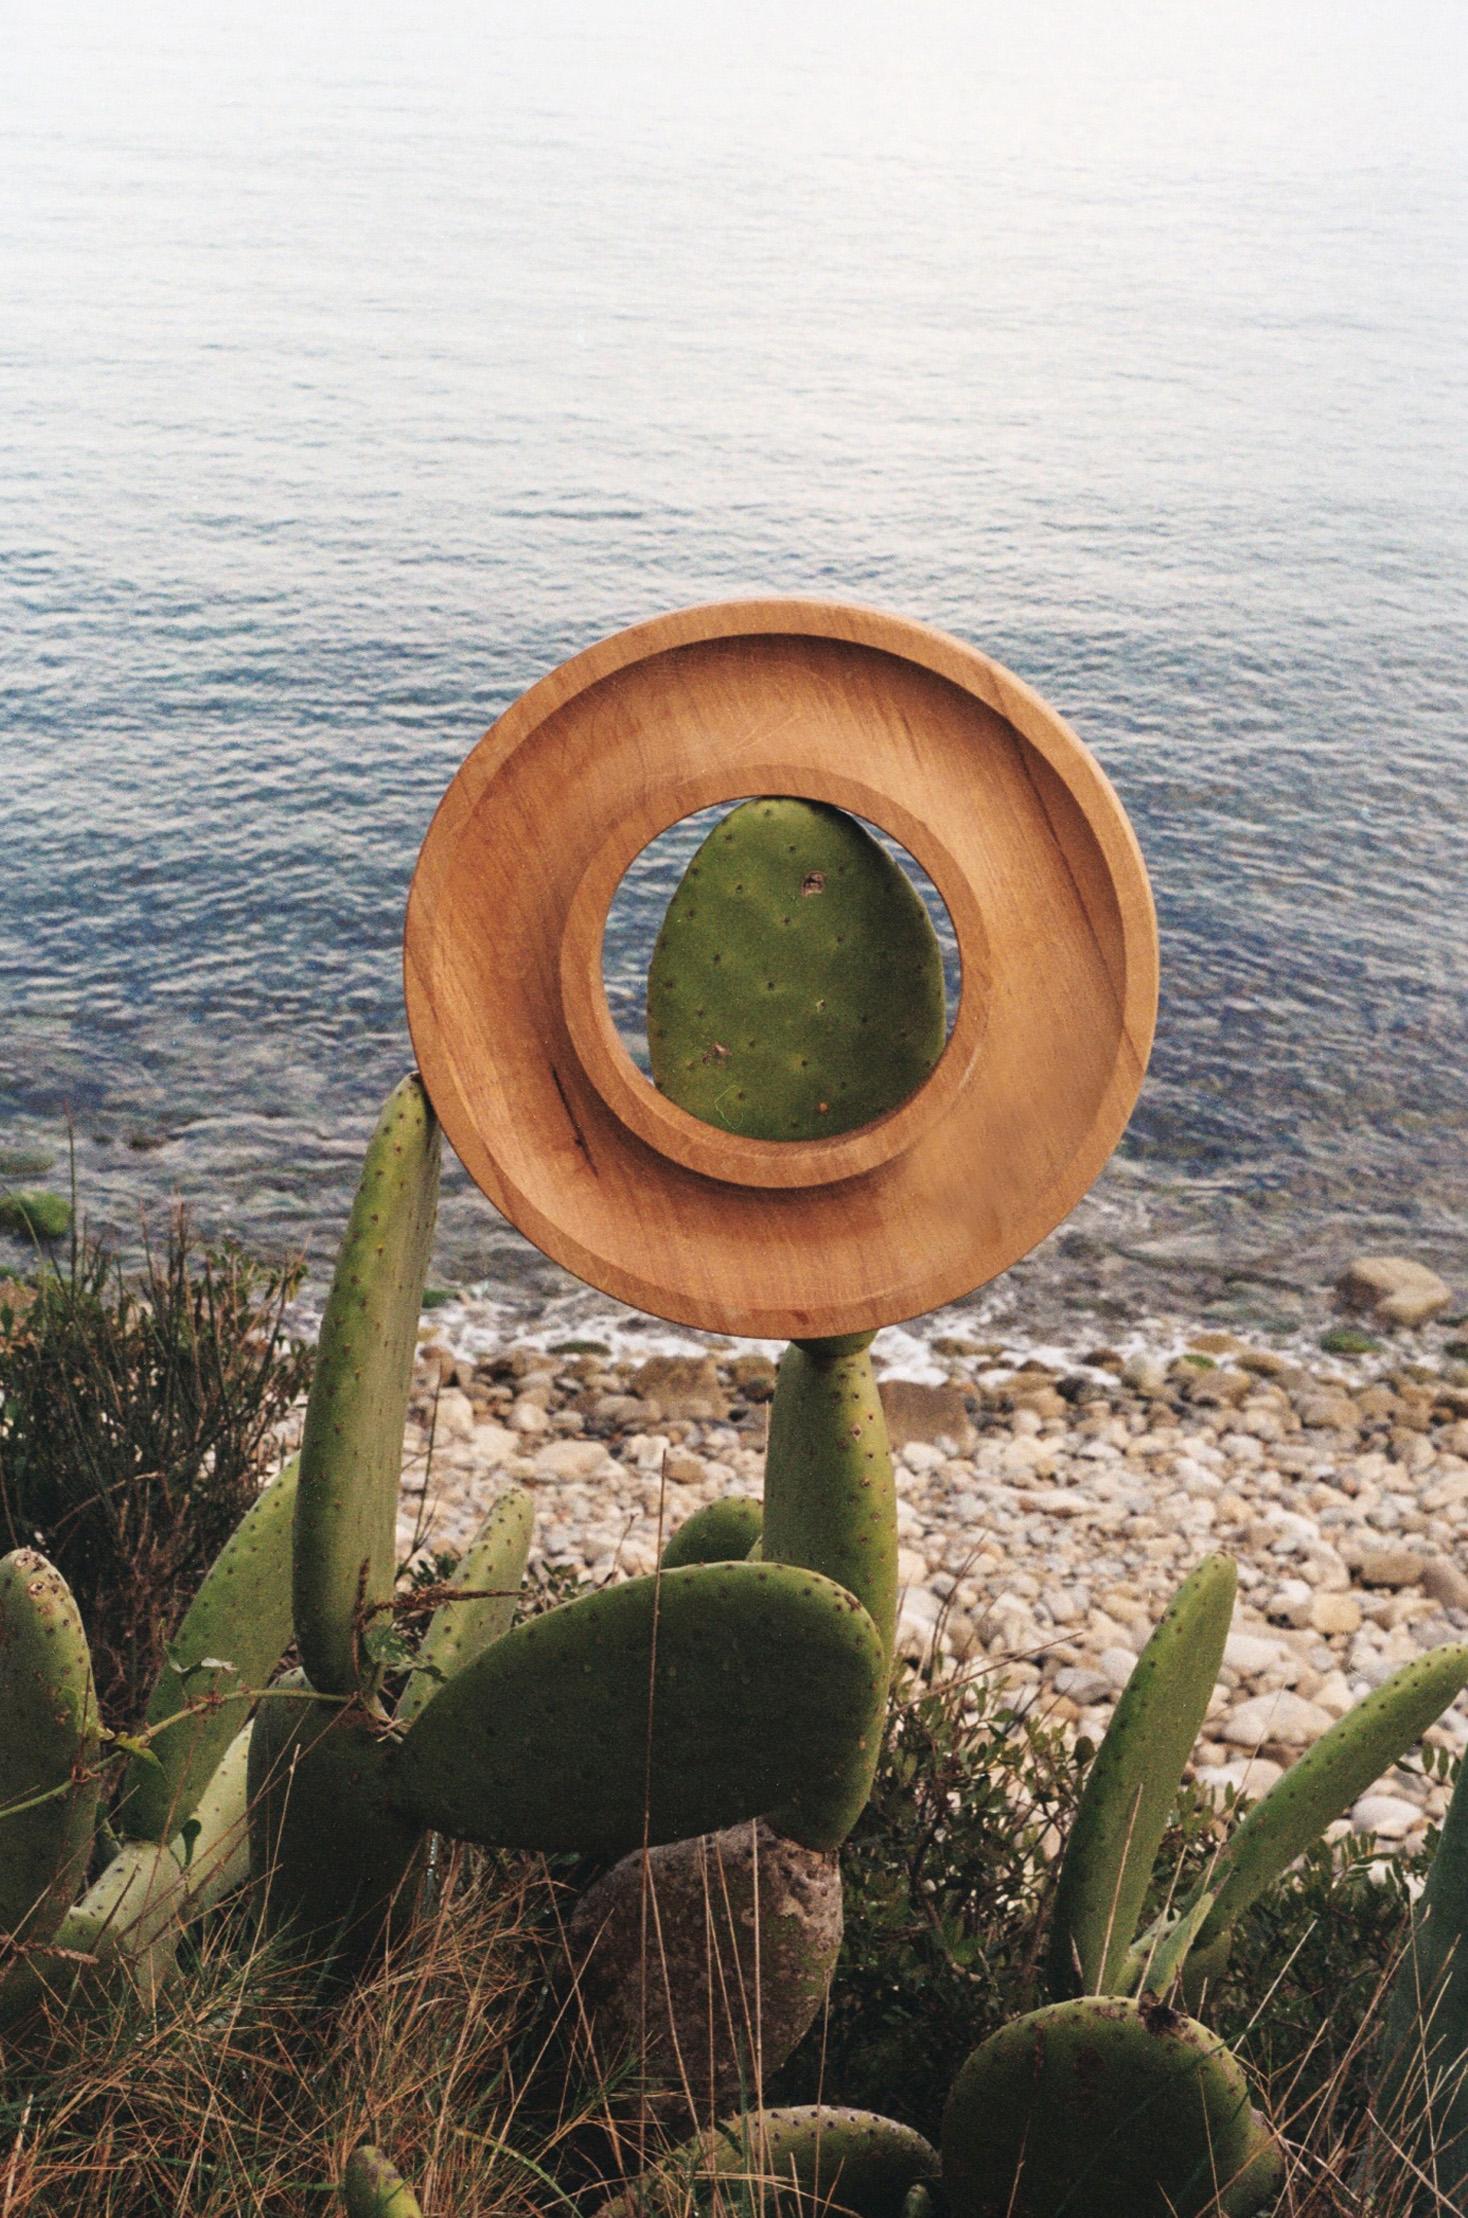 The oak ring tray is a minimalist style round shaped centerpiece made of treated Oak, manufactured according to traditional methods.